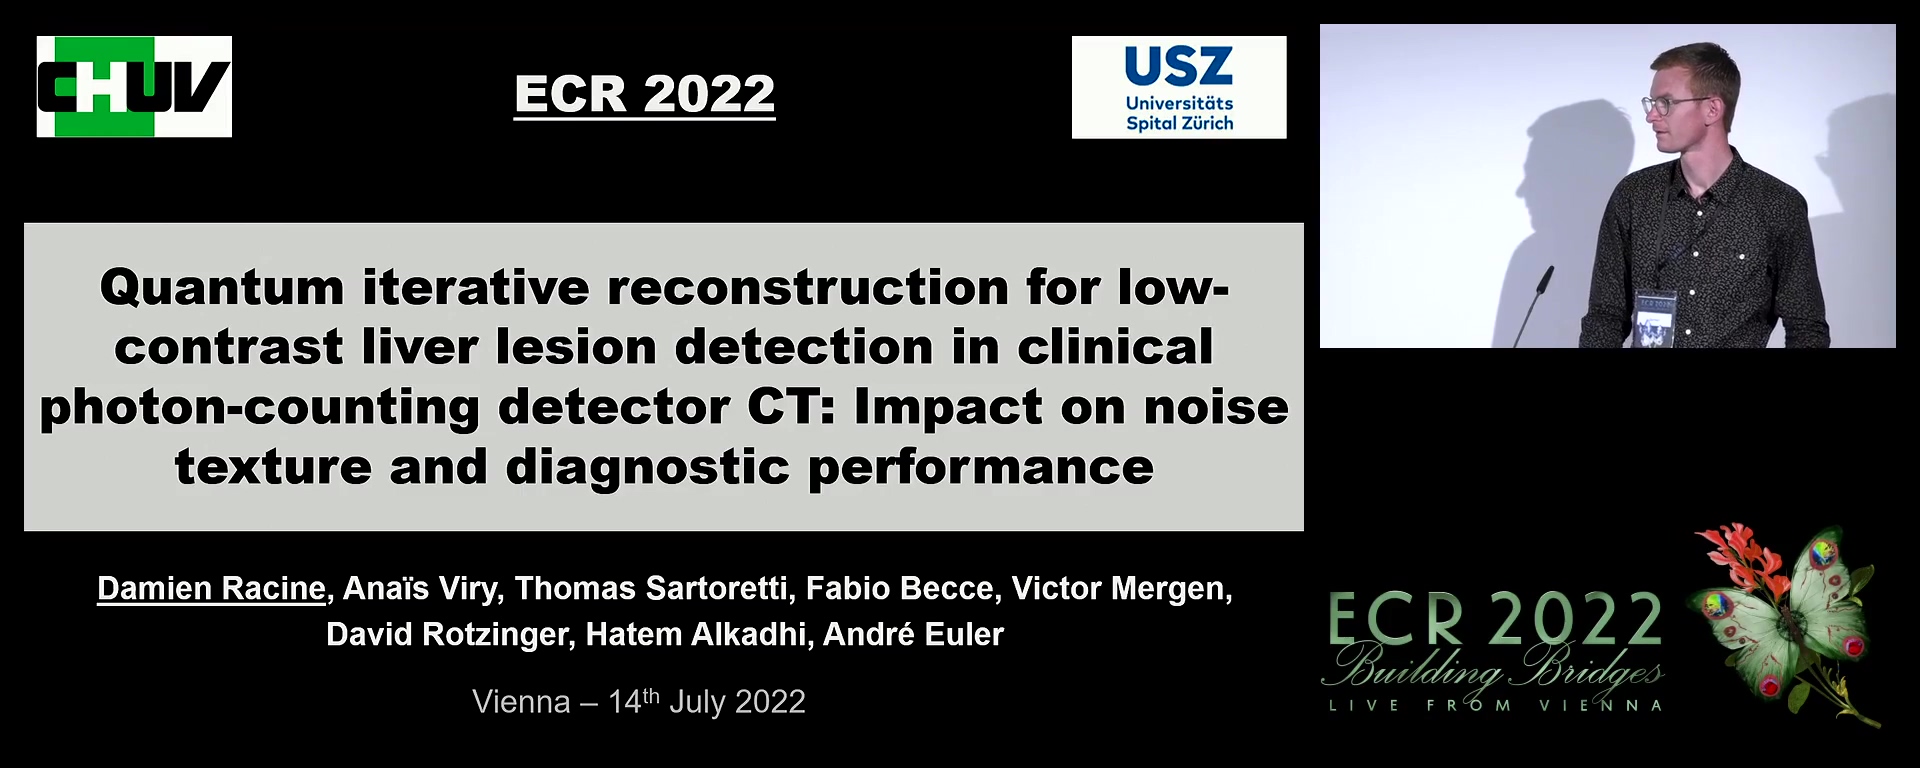 Quantum iterative reconstruction for low-contrast liver lesion detection in clinical photon-counting detector CT: Impact on noise texture and diagnostic performance - Damien Racine, Lausanne / CH